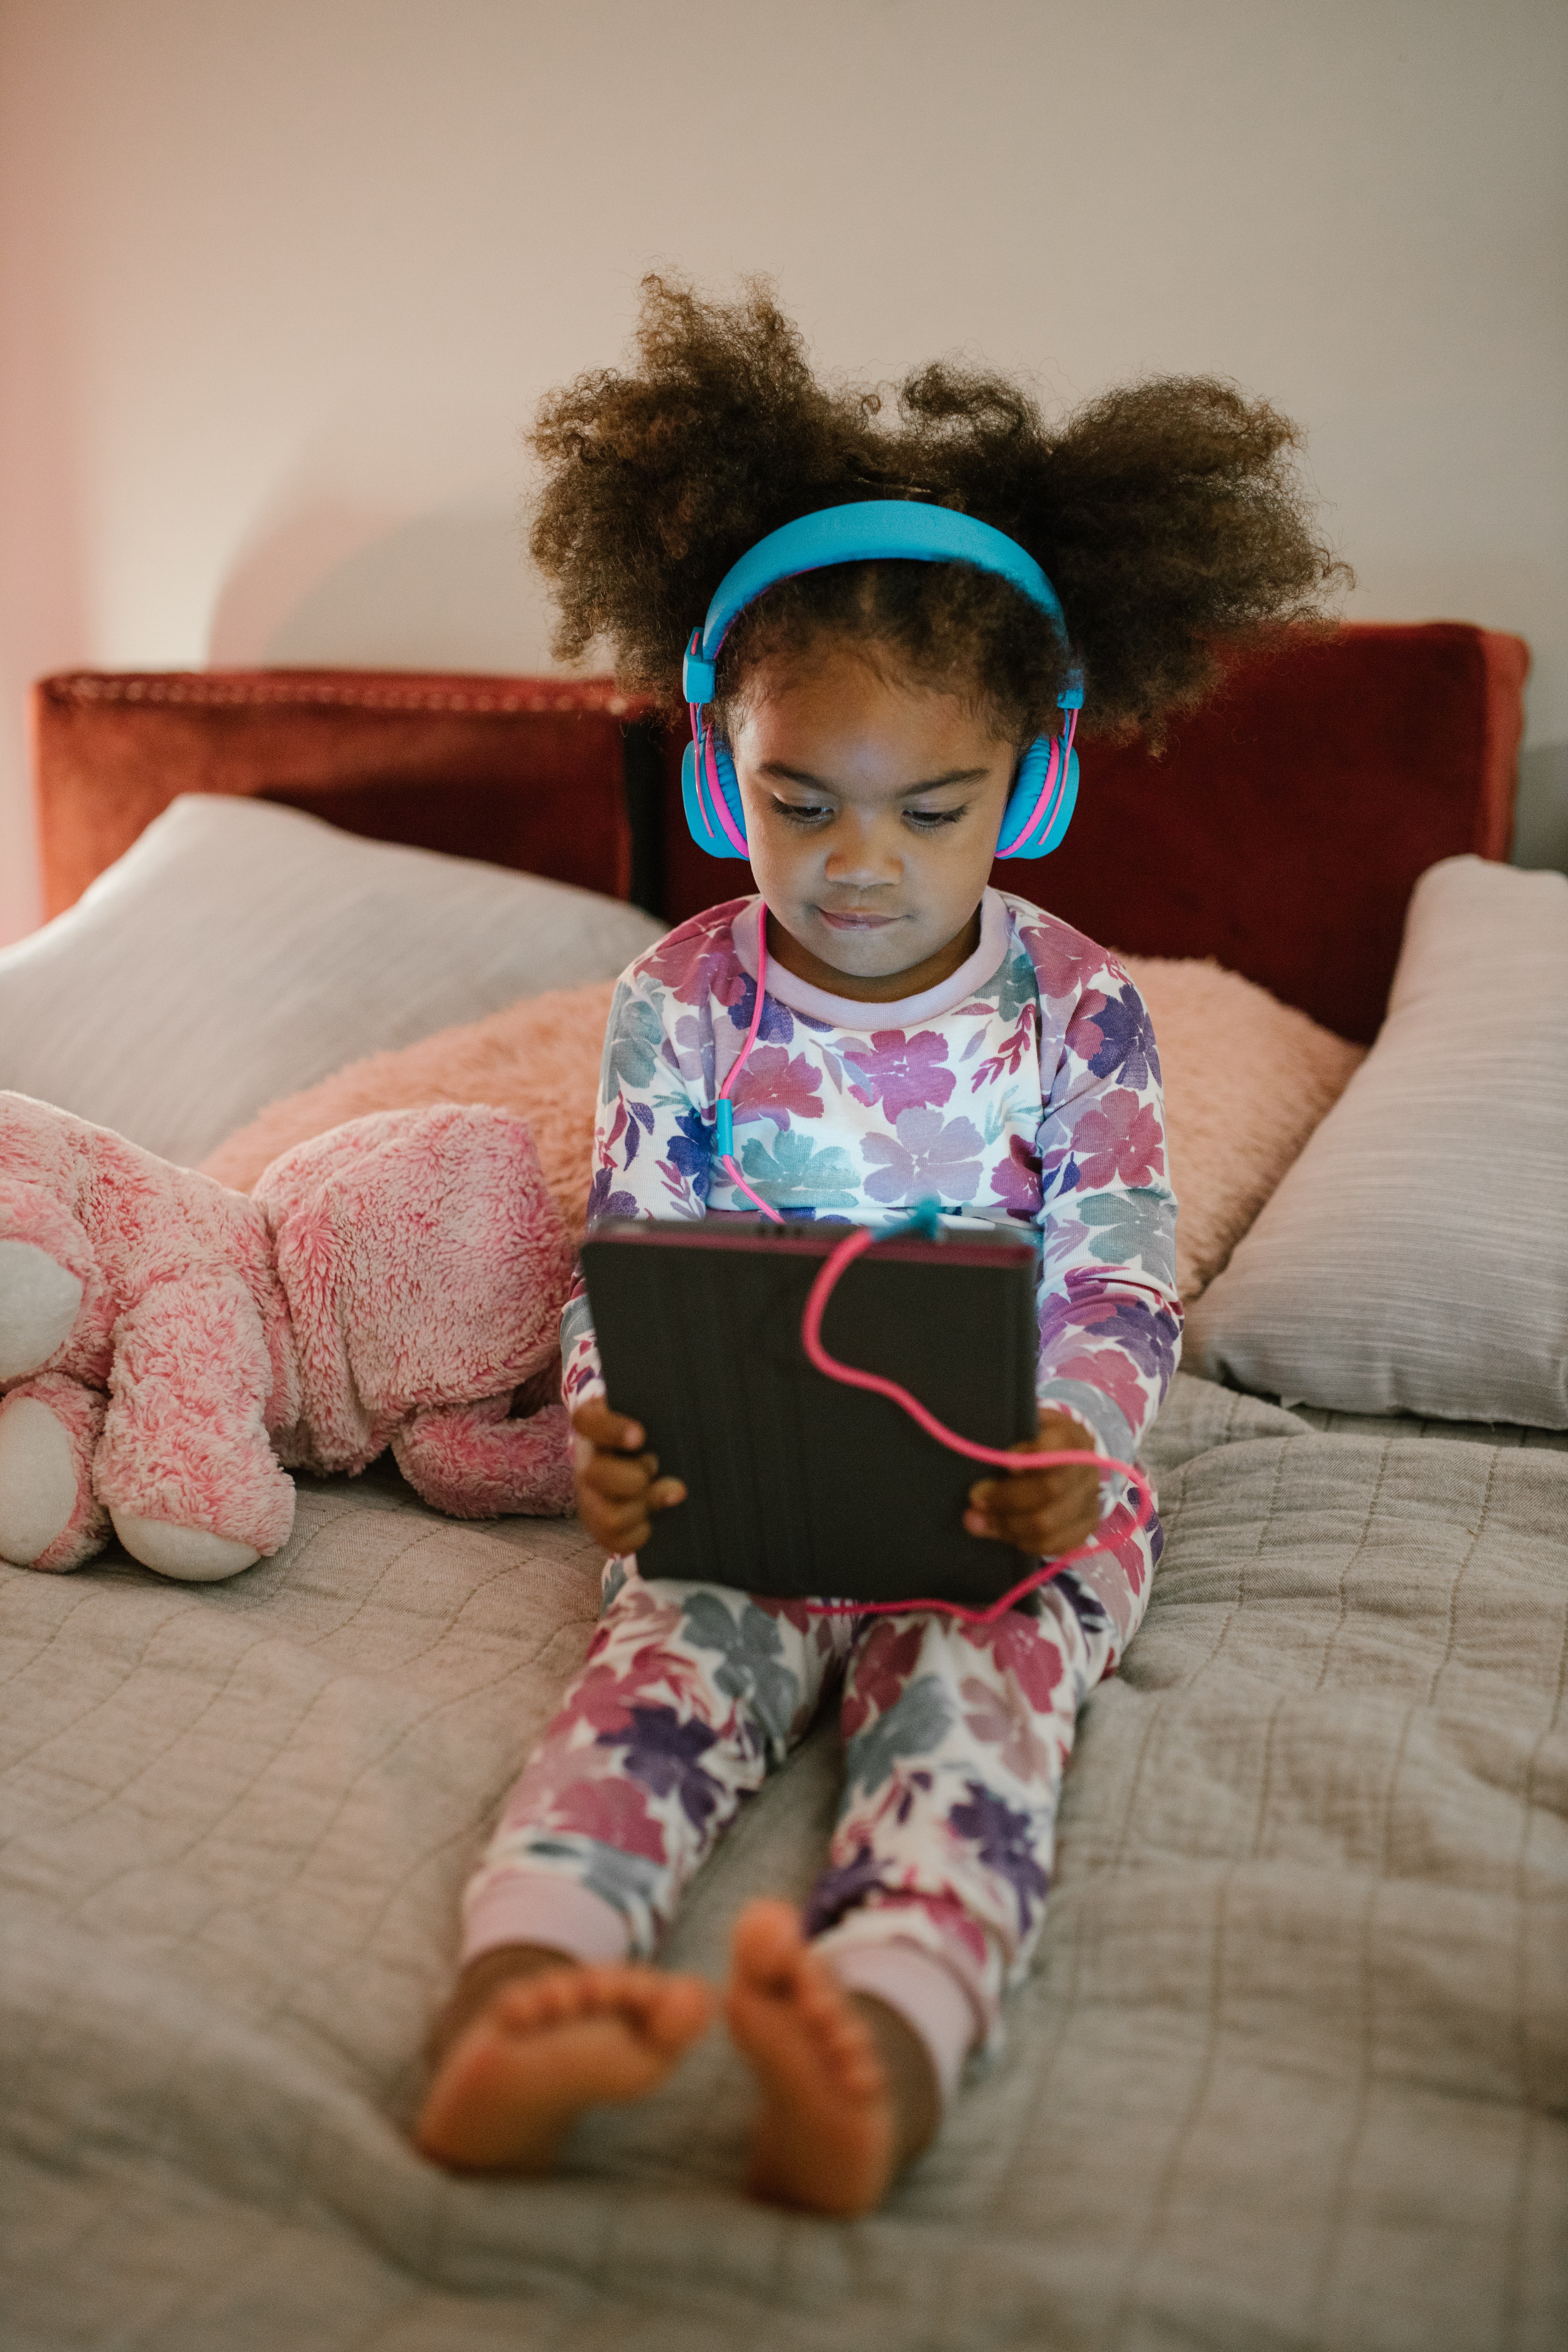 Photo of a little girl with curly hair, sitting on a bed wear pajamas with headphones, looking at a digital tablet.